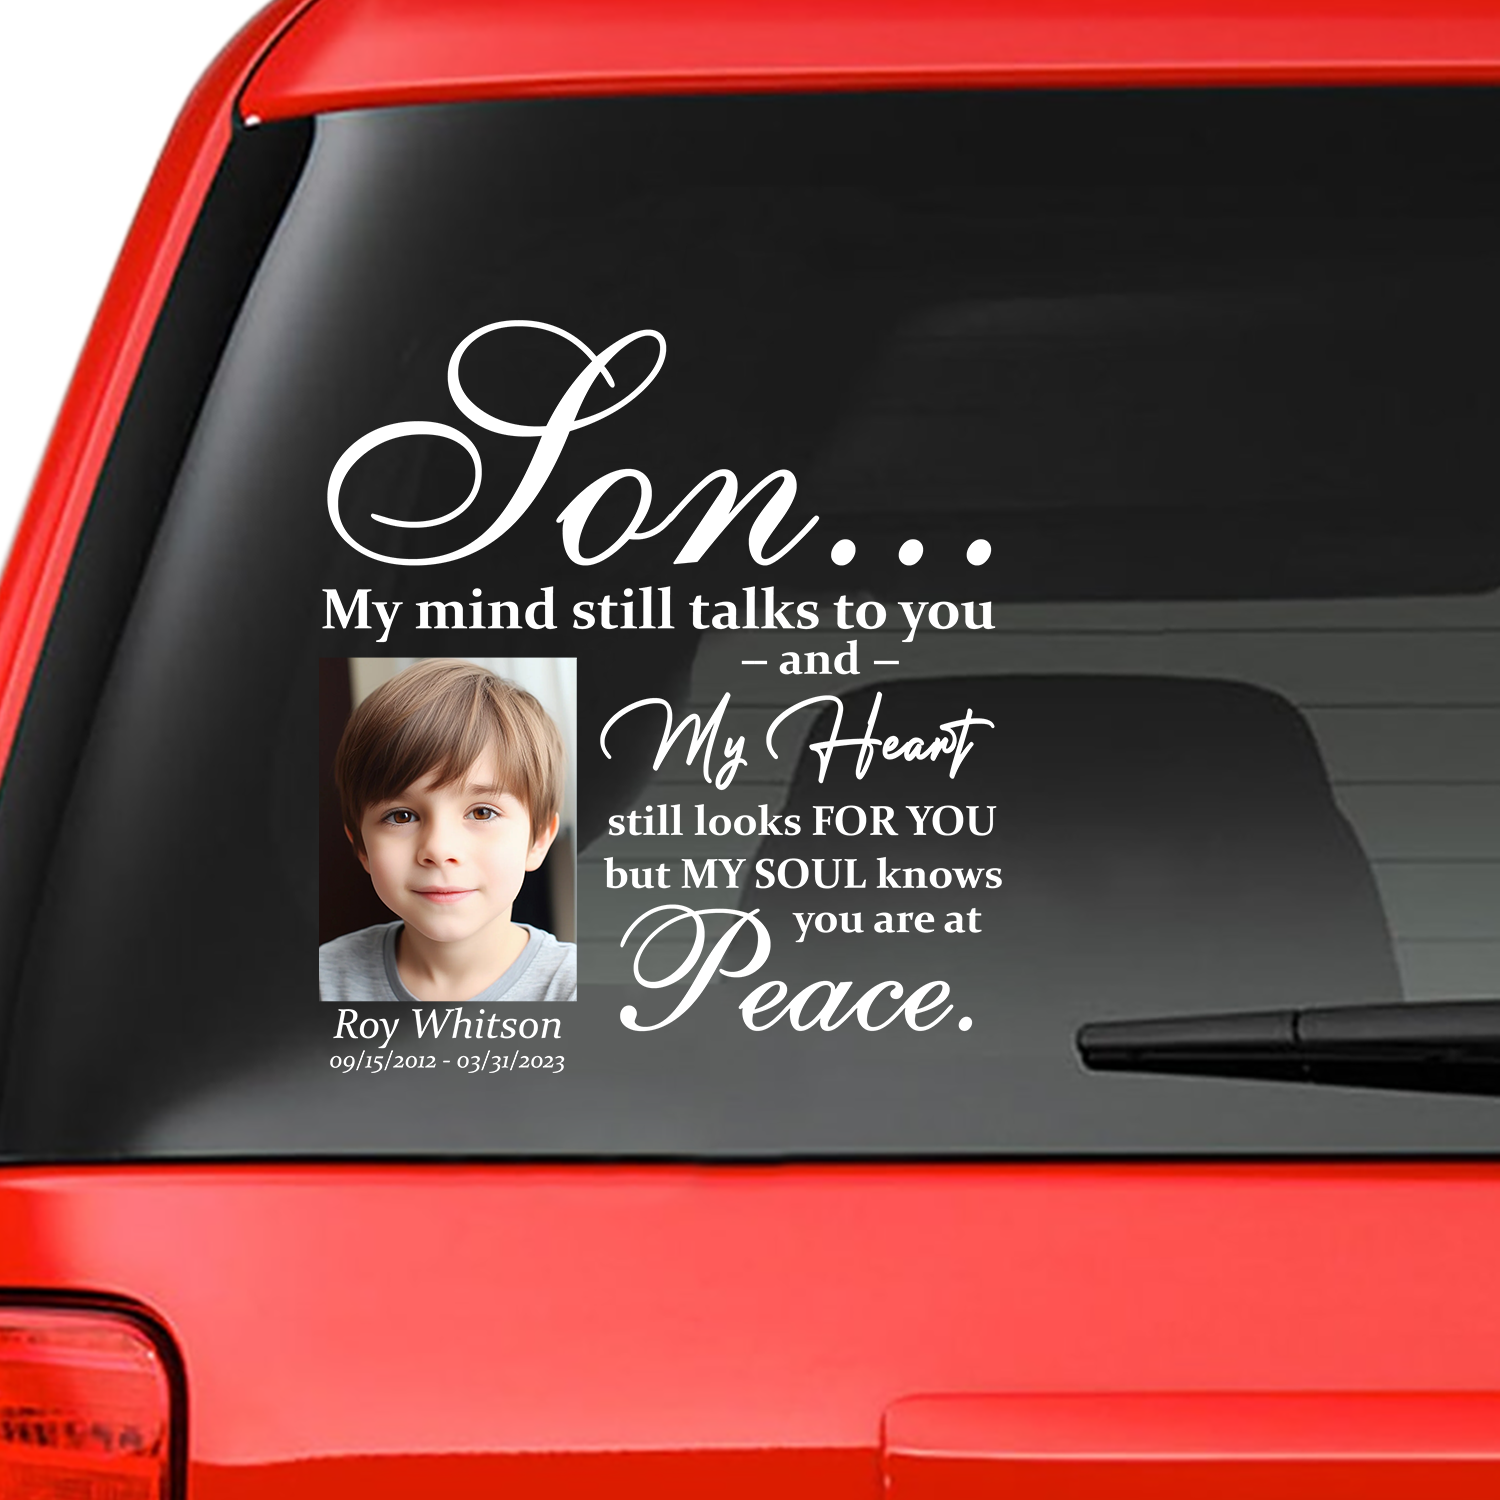 Custom in loving memory sticker, Personal Memory Decal Car : Son, My mind still talks to you